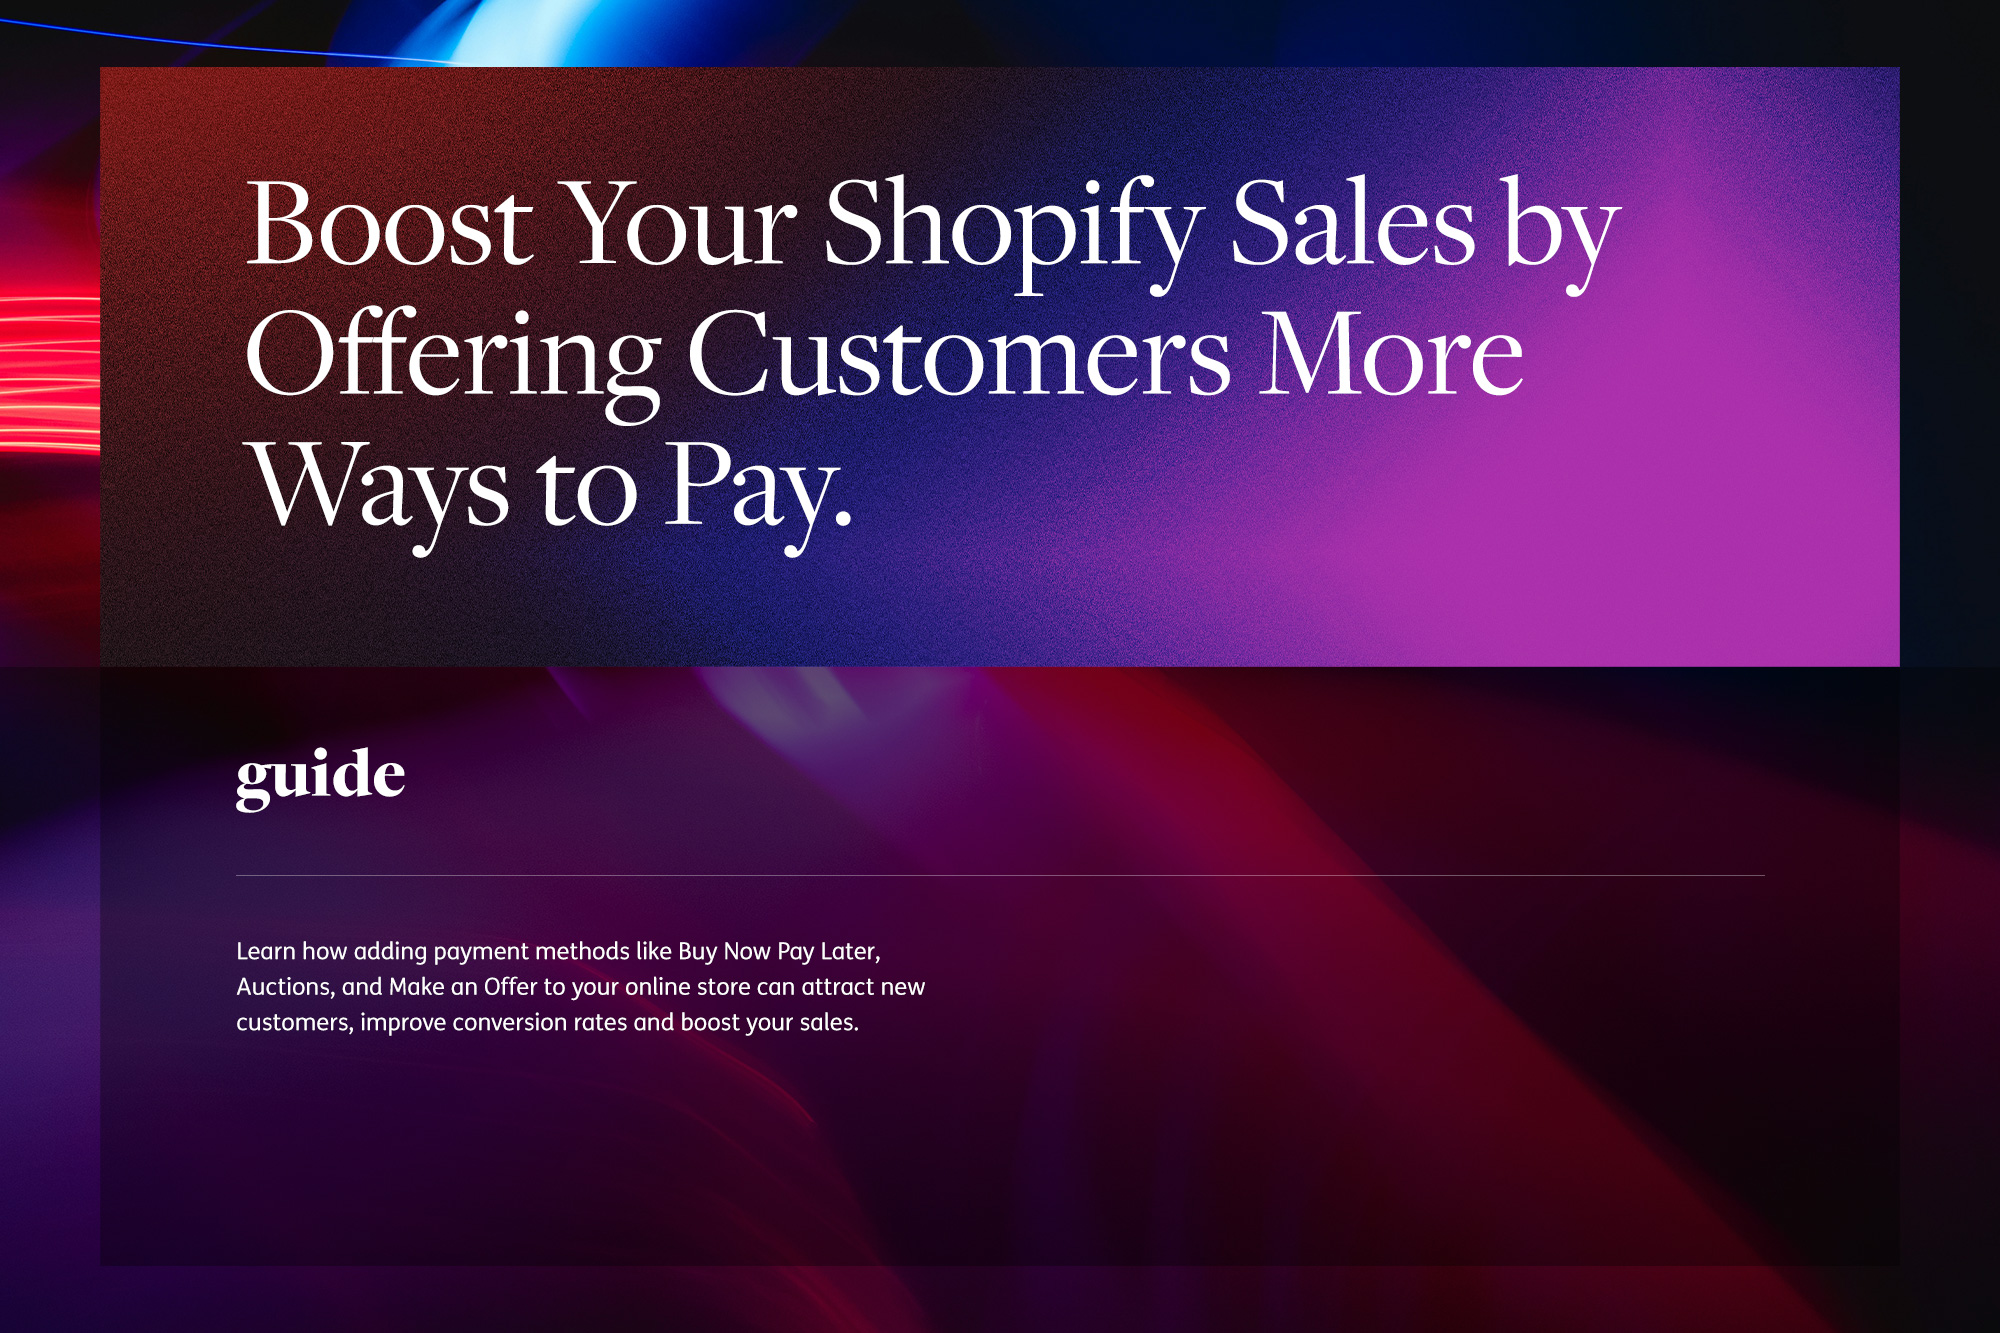 Boost your shopify sales by offering customers more ways to pay.